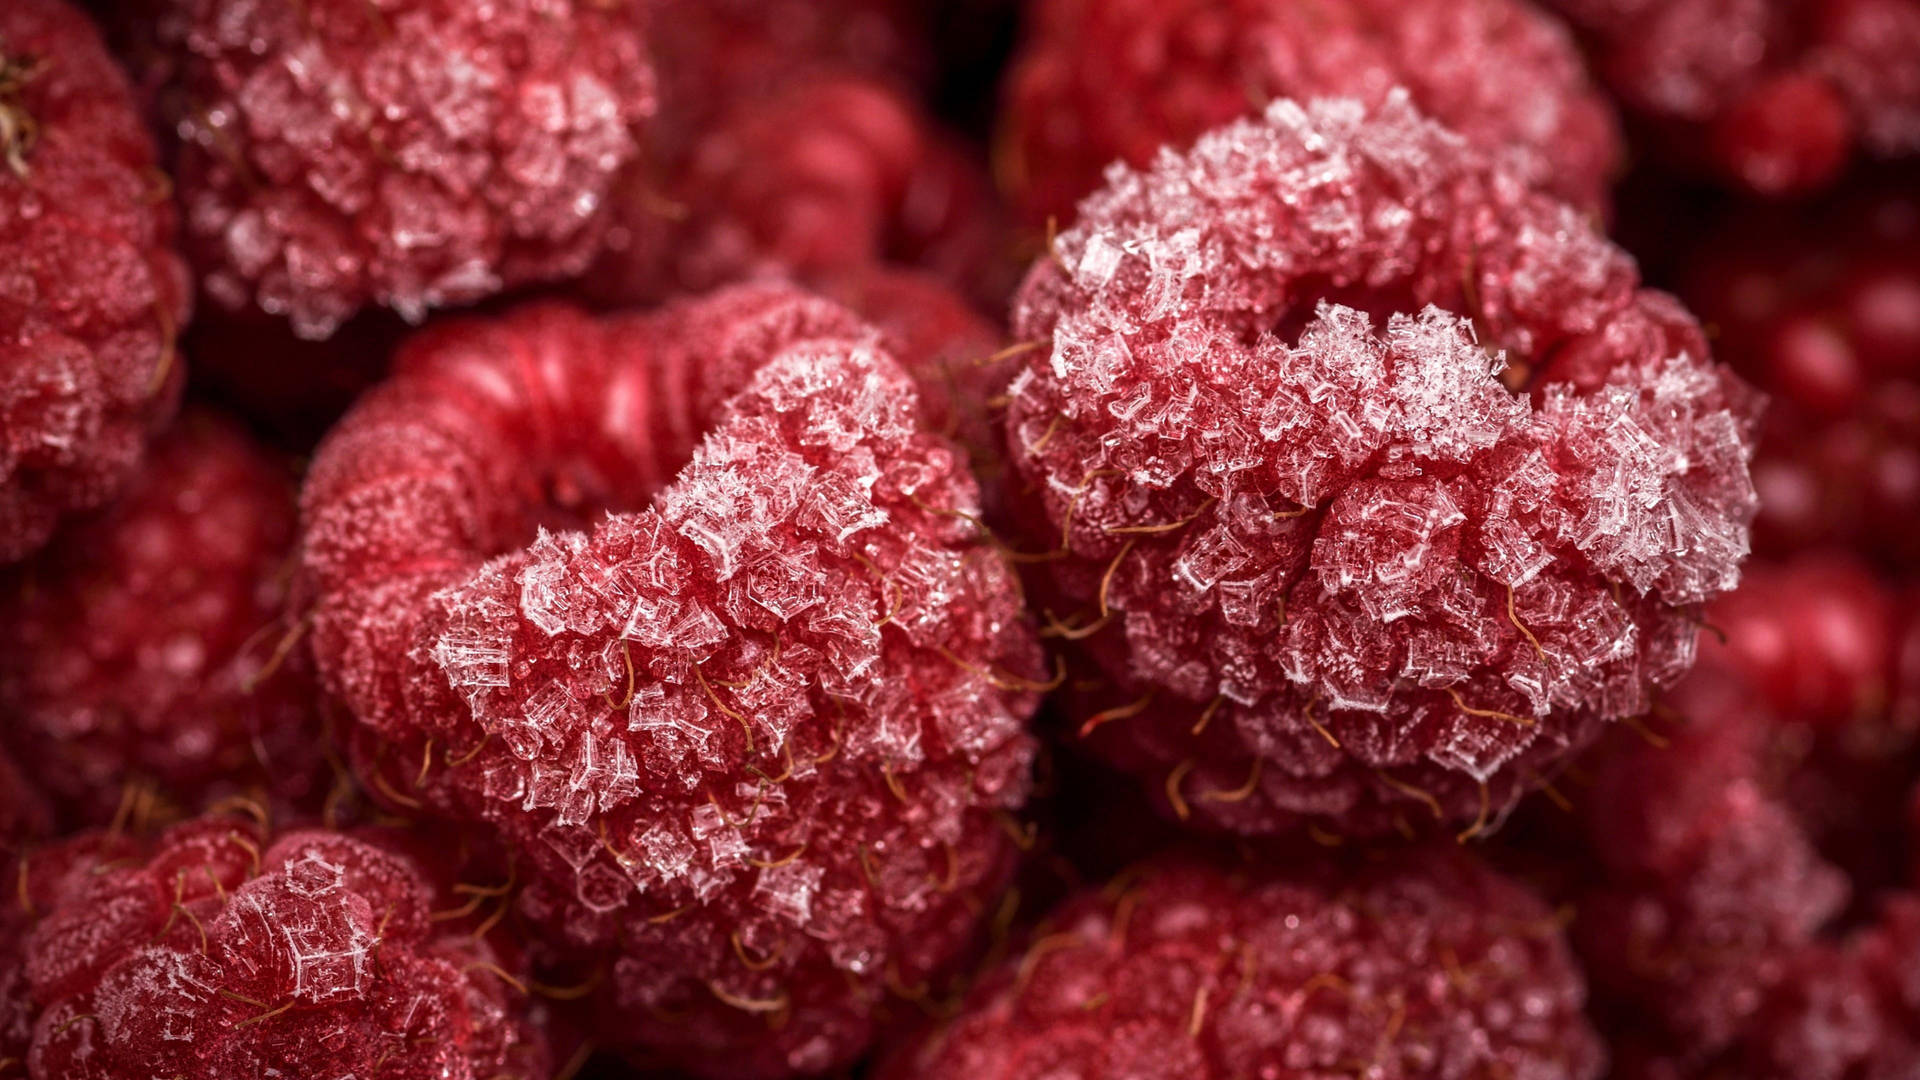 Up-close View Of Fresh, Ripe Red Berries Background